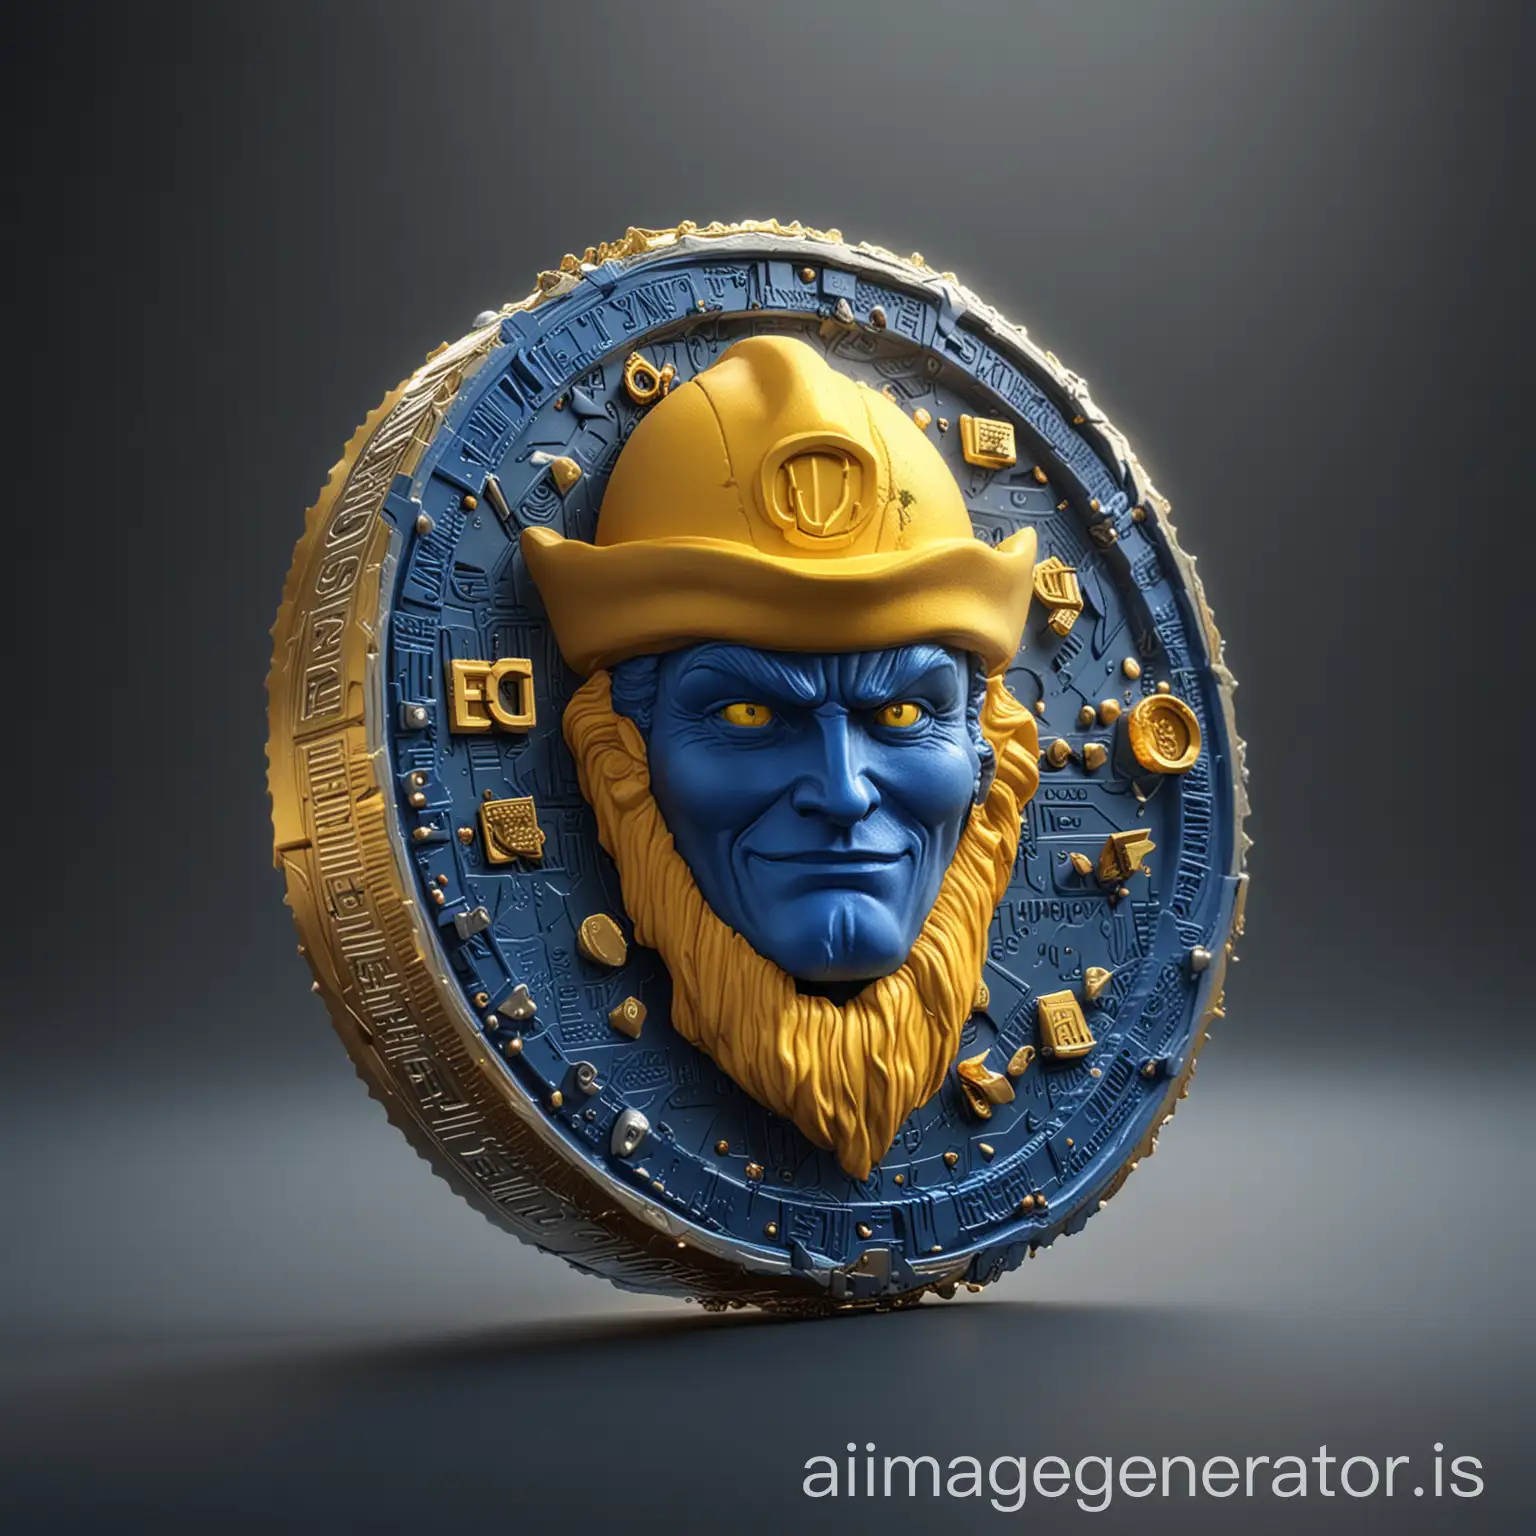 Futuristic blue and yellow crypto currency with captain crunch on the front of the token in 3D.